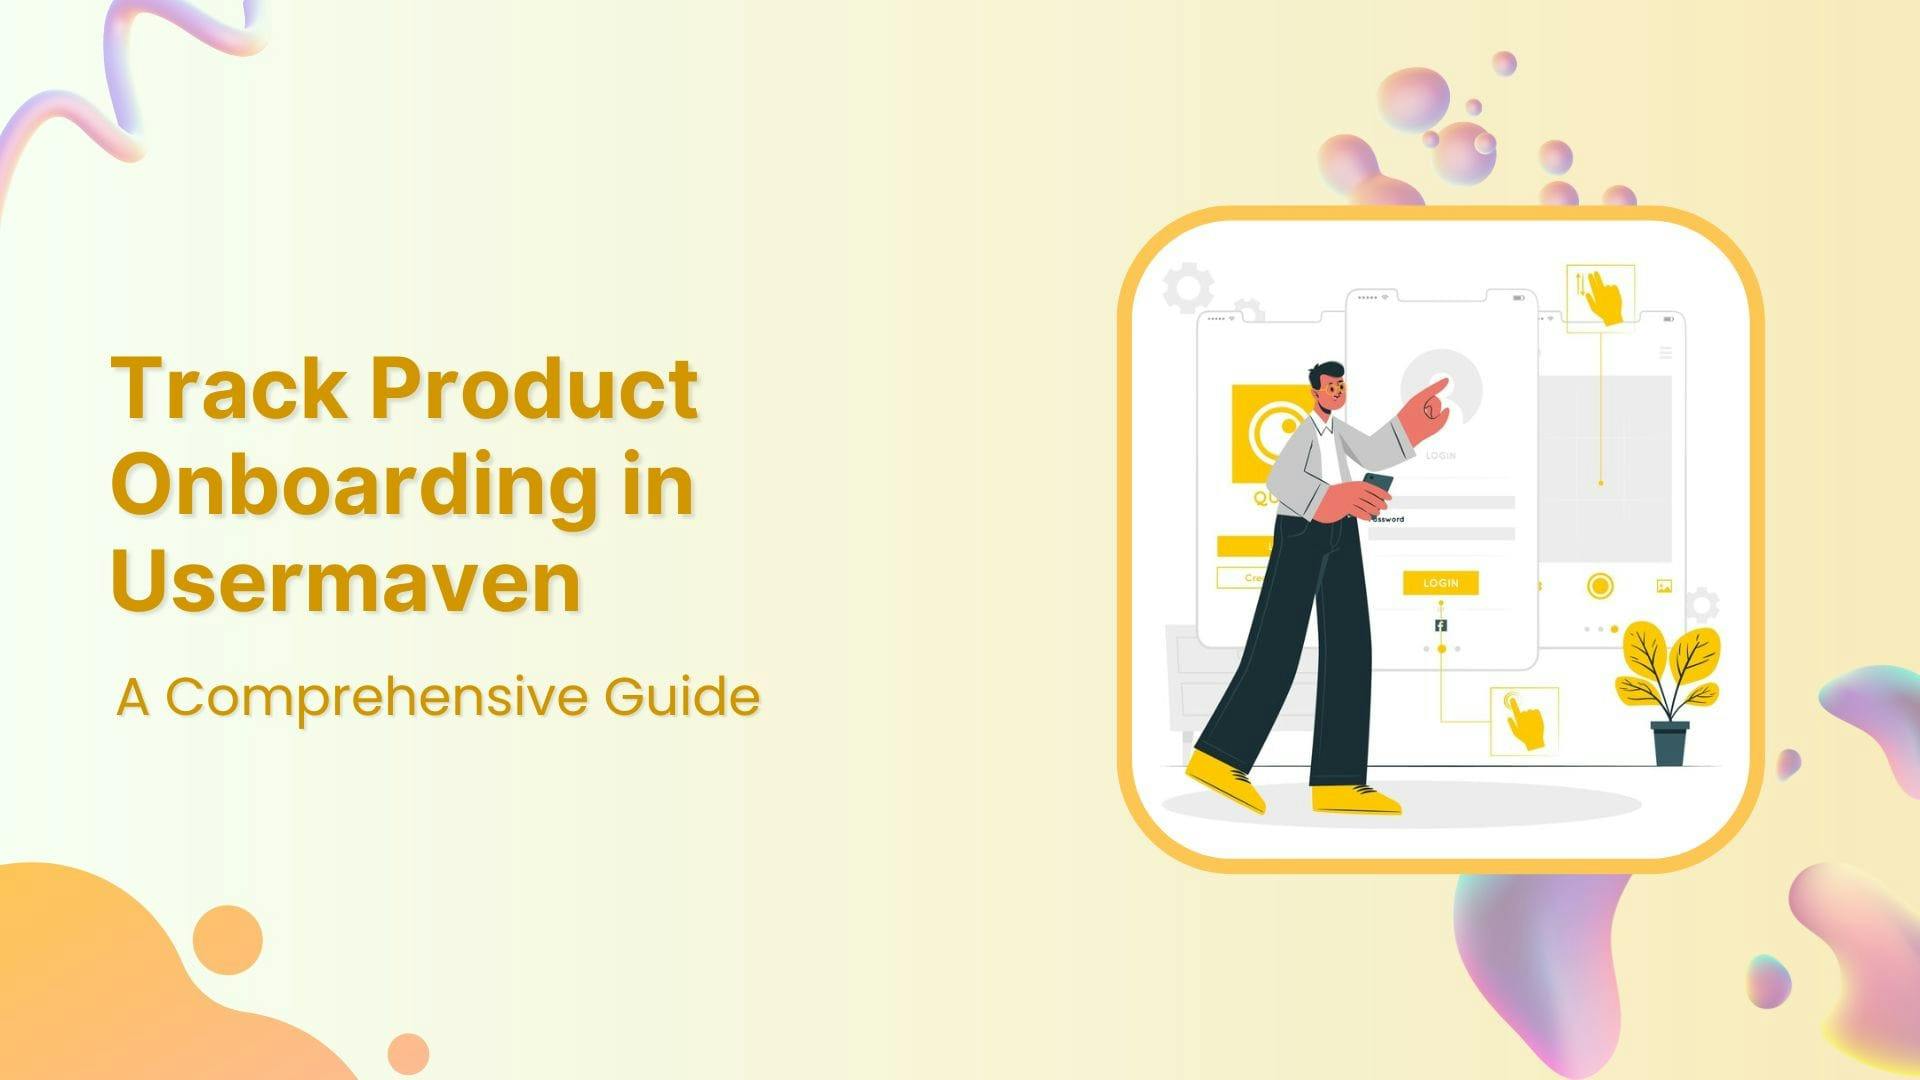 How to Track Product Onboarding in Usermaven